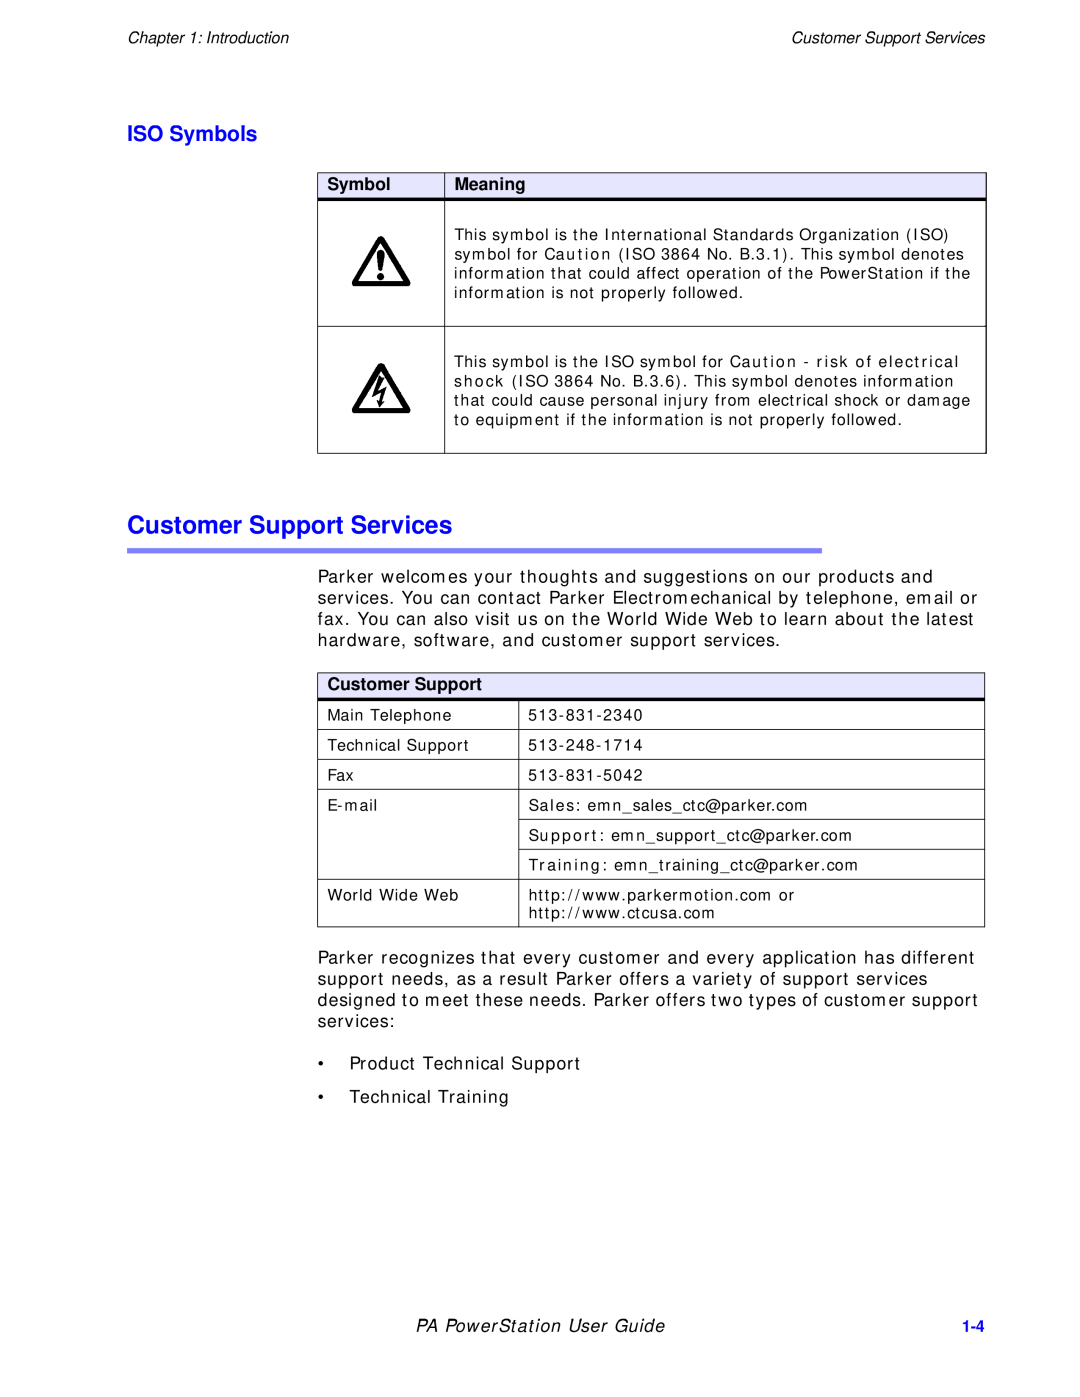 Parker Hannifin PA Series manual Customer Support Services, ISO Symbols, PA PowerStation User Guide 